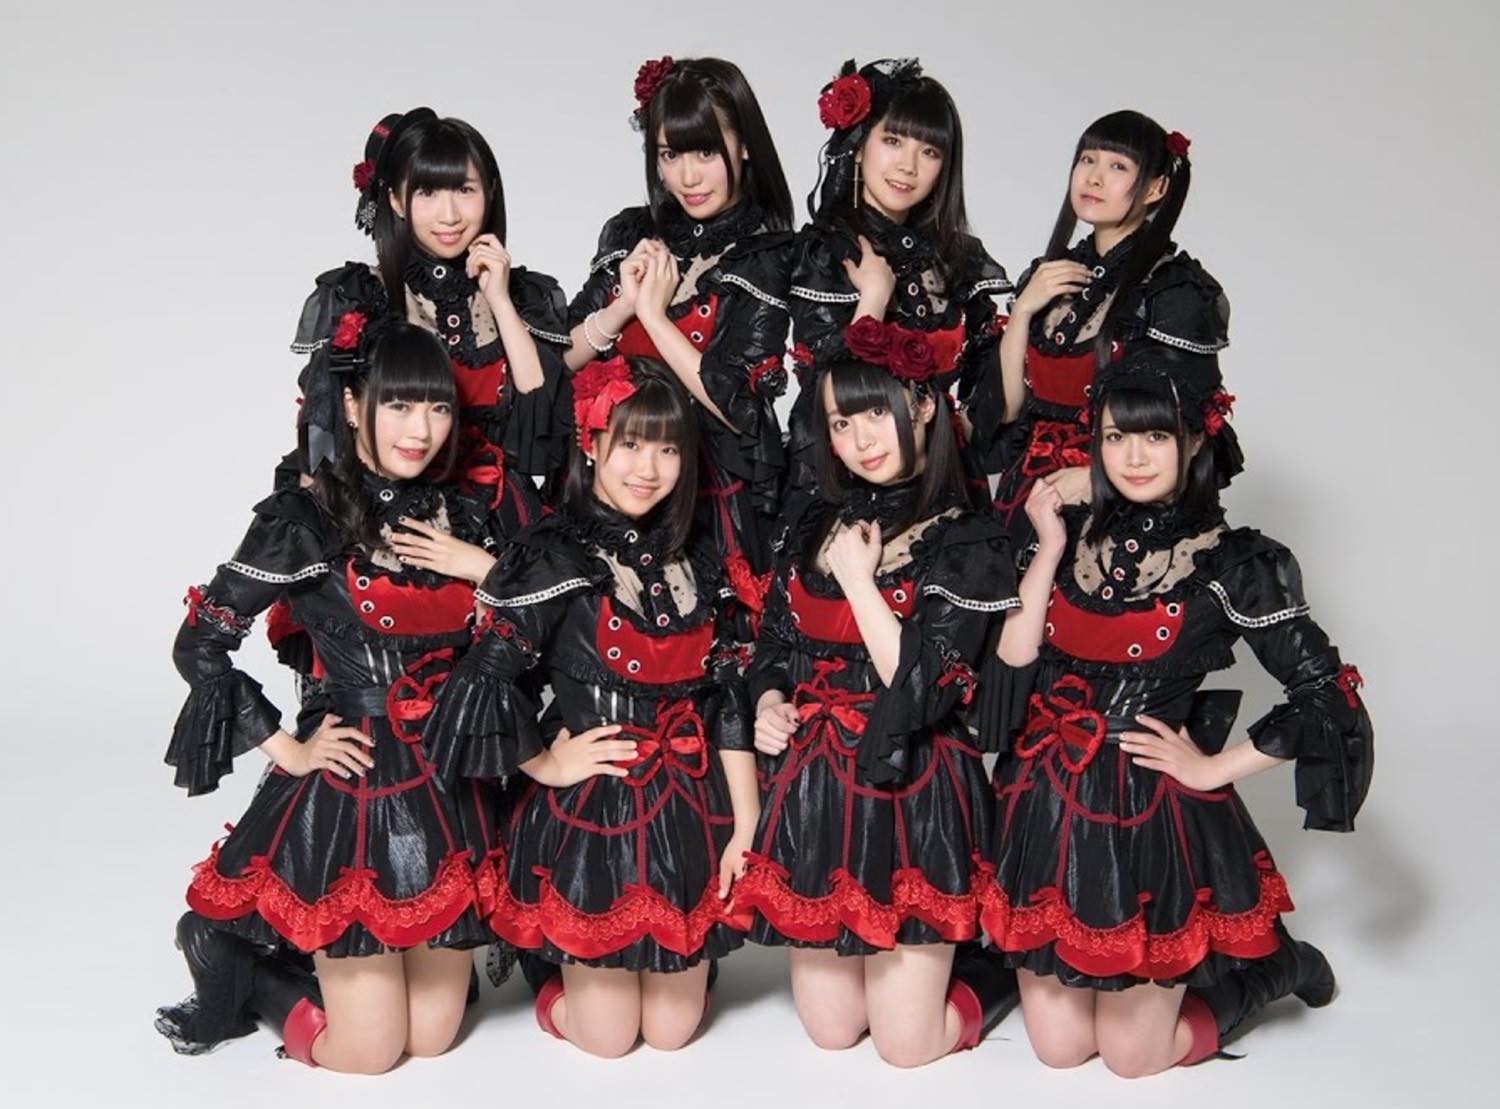 Iketeru Hearts Cast an Evil Spell by Candlelight in the MV for “Zaishō Lucifer”!